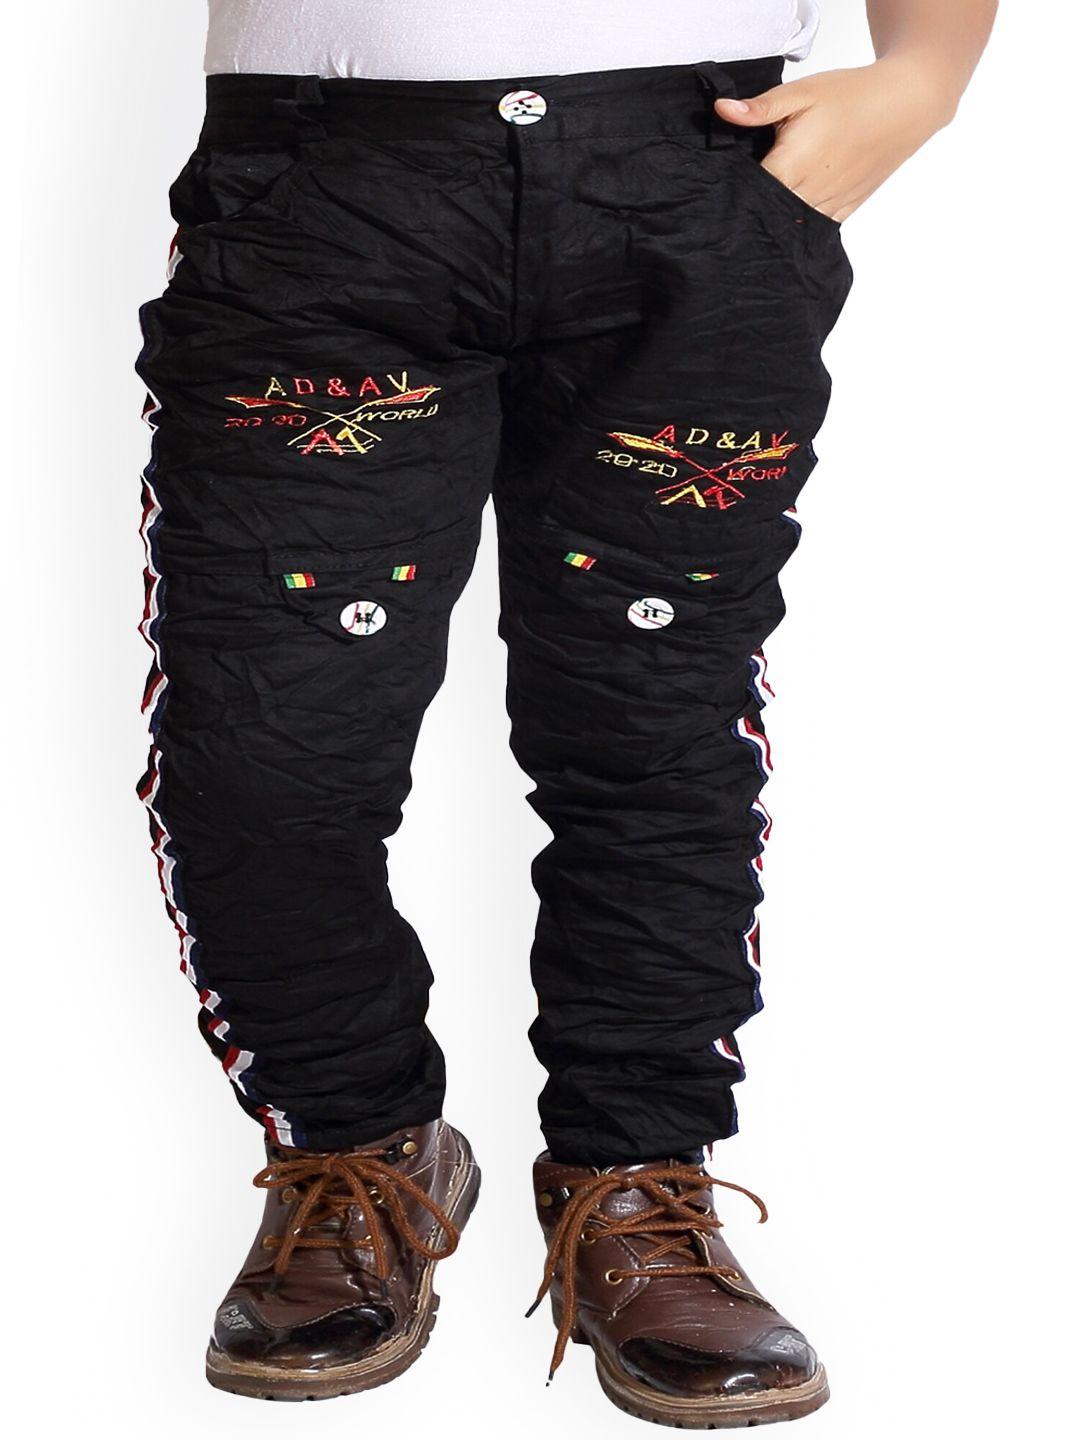 baesd-boys-typography-printed-slim-fit-cotton-trousers